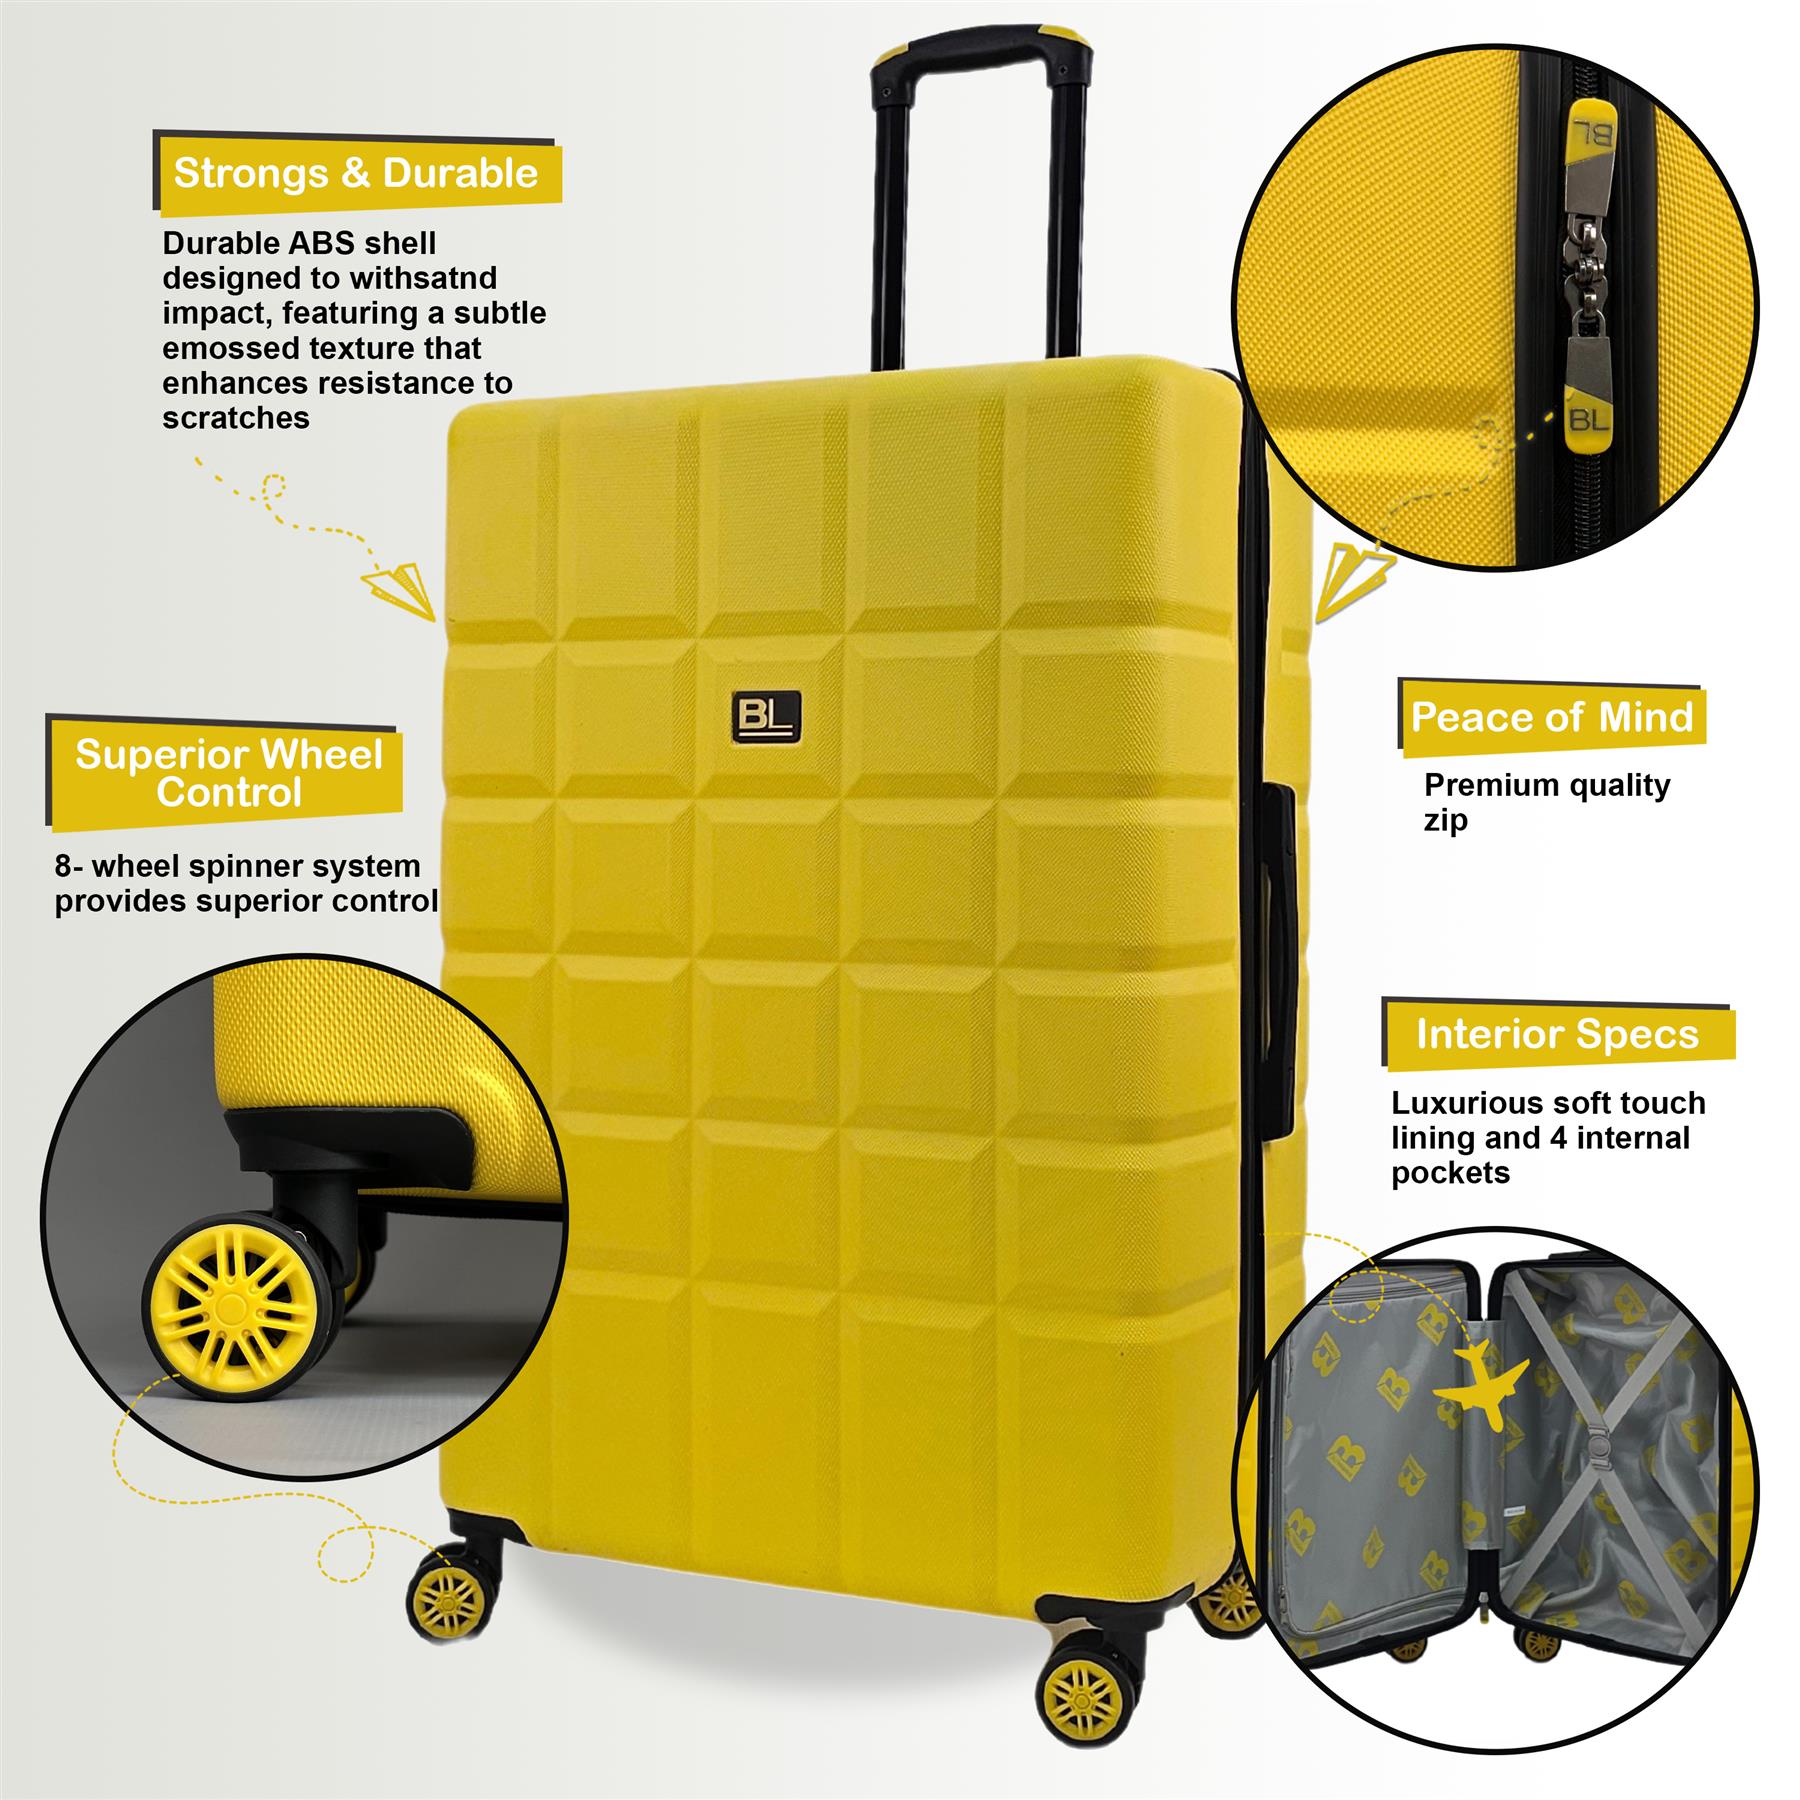 Coker Cabin Soft Shell Suitcase in Yellow